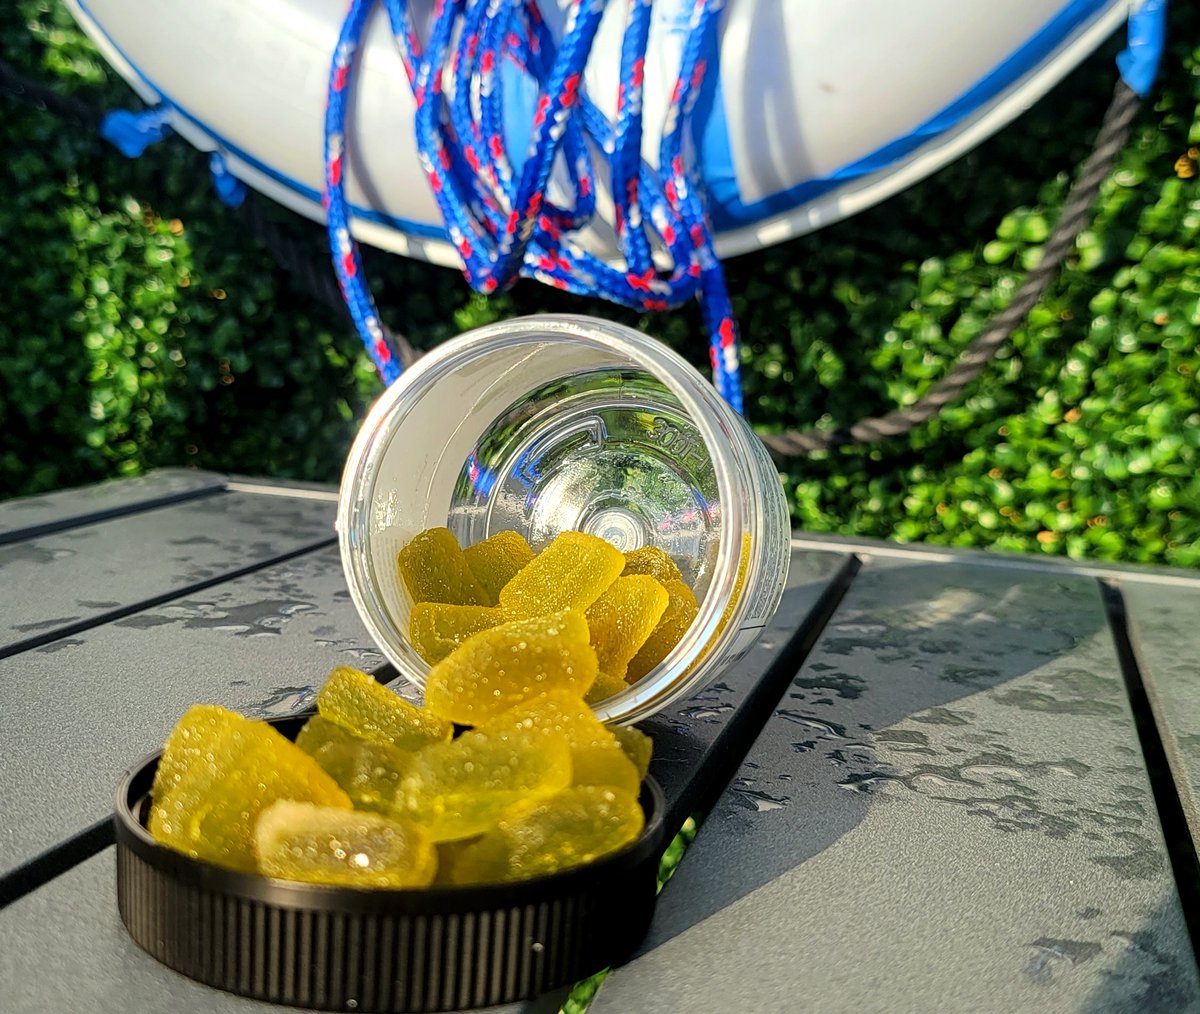 🌴🌿 Embark on a tantalizing journey with our Tropical Fruit Gummies from Pure Hemp Shop! 🌟🔥
l8r.it/0Vls
🌴🍍🍋🥭
#Adventure #ElevateYourExperience #PureHempShop #TropicalAF 
 #cbd #d8  #wellness  #cbdgummies #photooftheday #edibles #enjoylife #wellbeing #selfcare